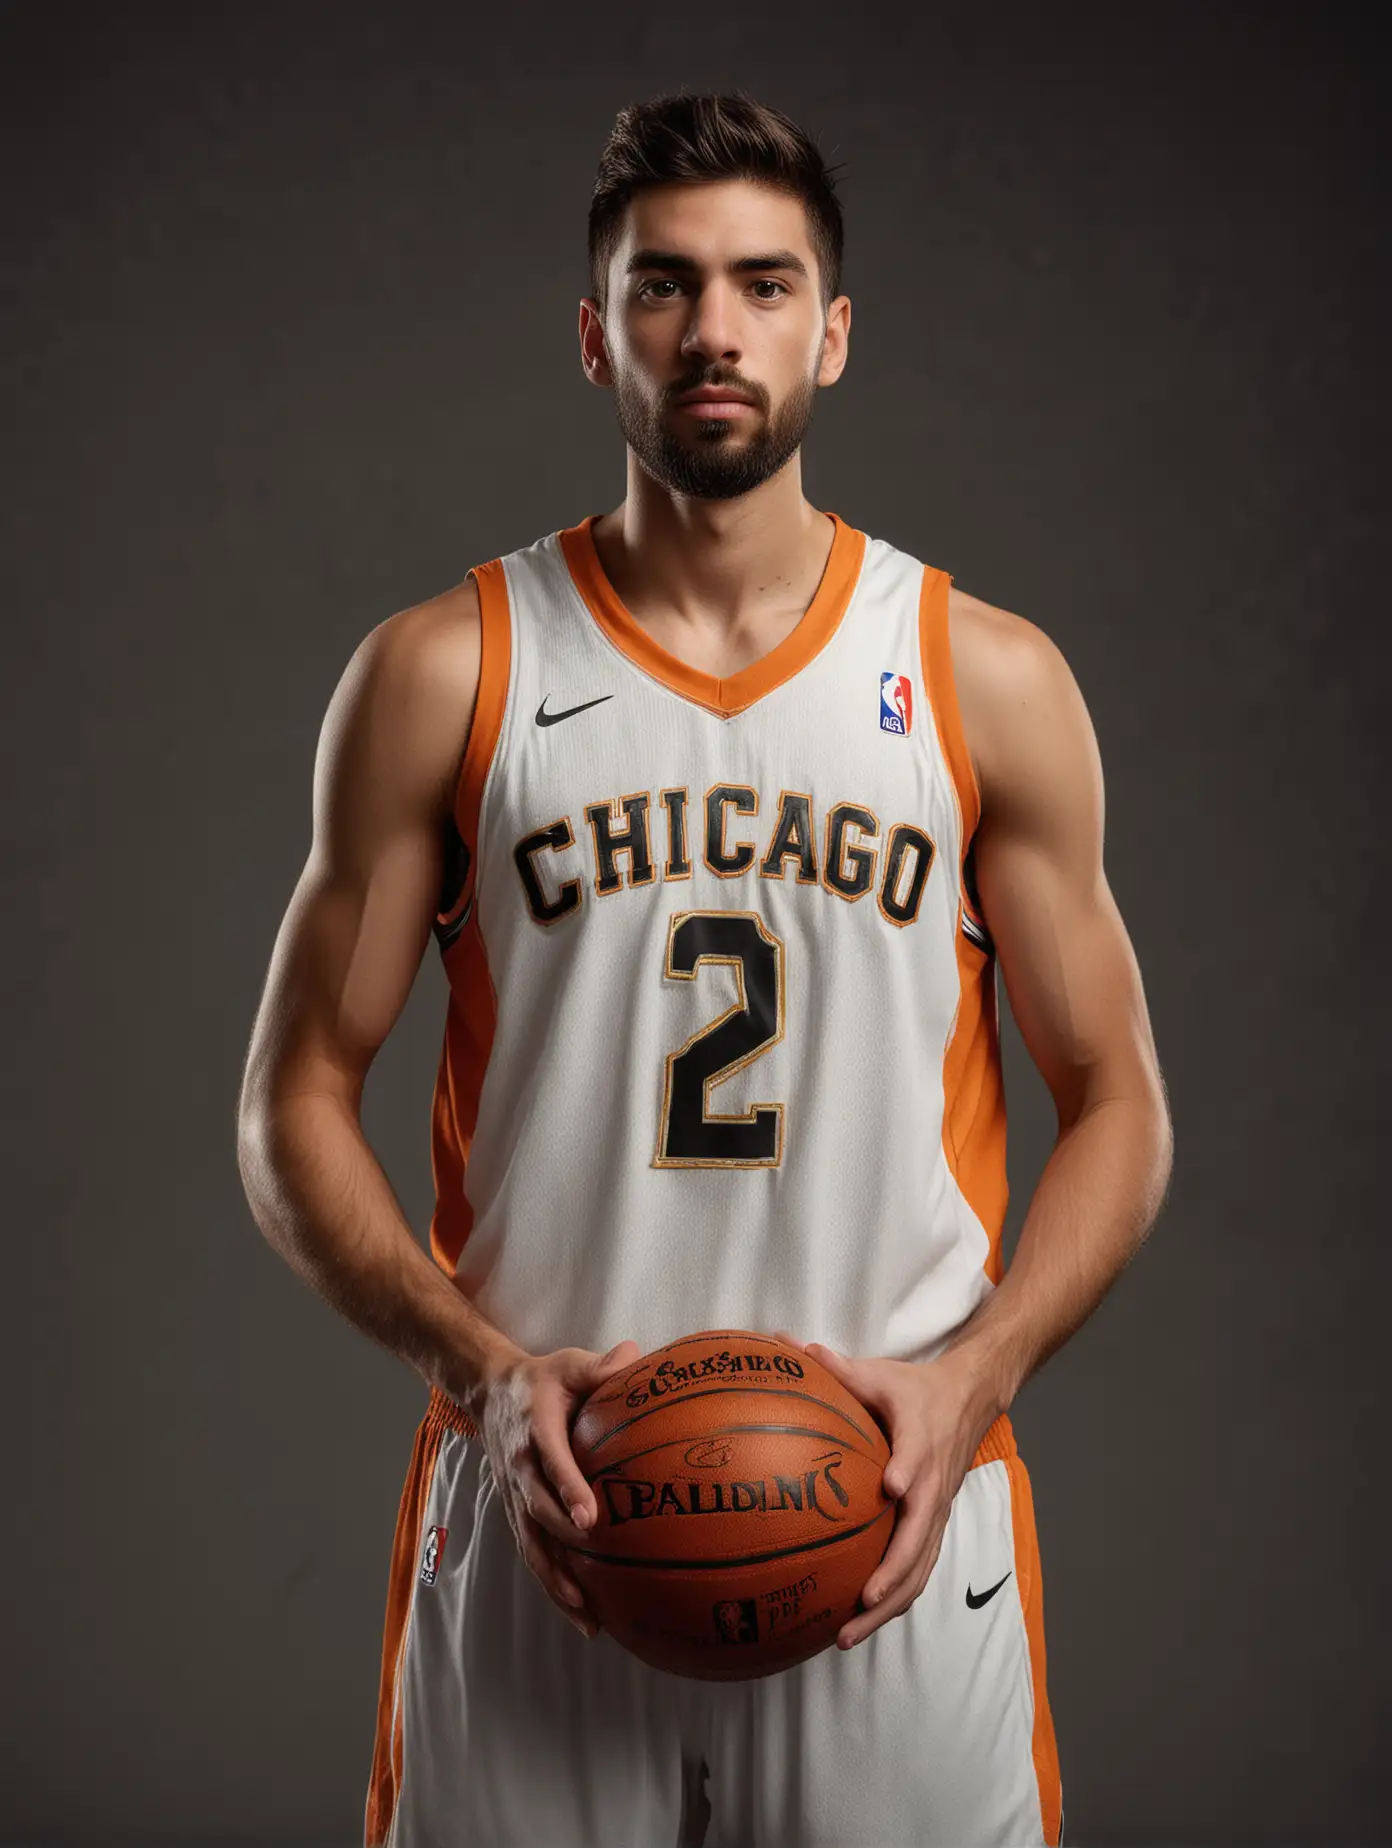 Outdoor court，A photo of a basketball player from Chicago wearing a white and gold jersey spinning an orange basketball with the number two on it while looking at the camera, full body shot, dark brown hair styled in fear, light beard, Handsome face, dark eyes, athletic build, NBA game action, high resolution, detailed skin texture, natural light, studio background, shot in portrait photography style using Canon EF wide-angle lens.